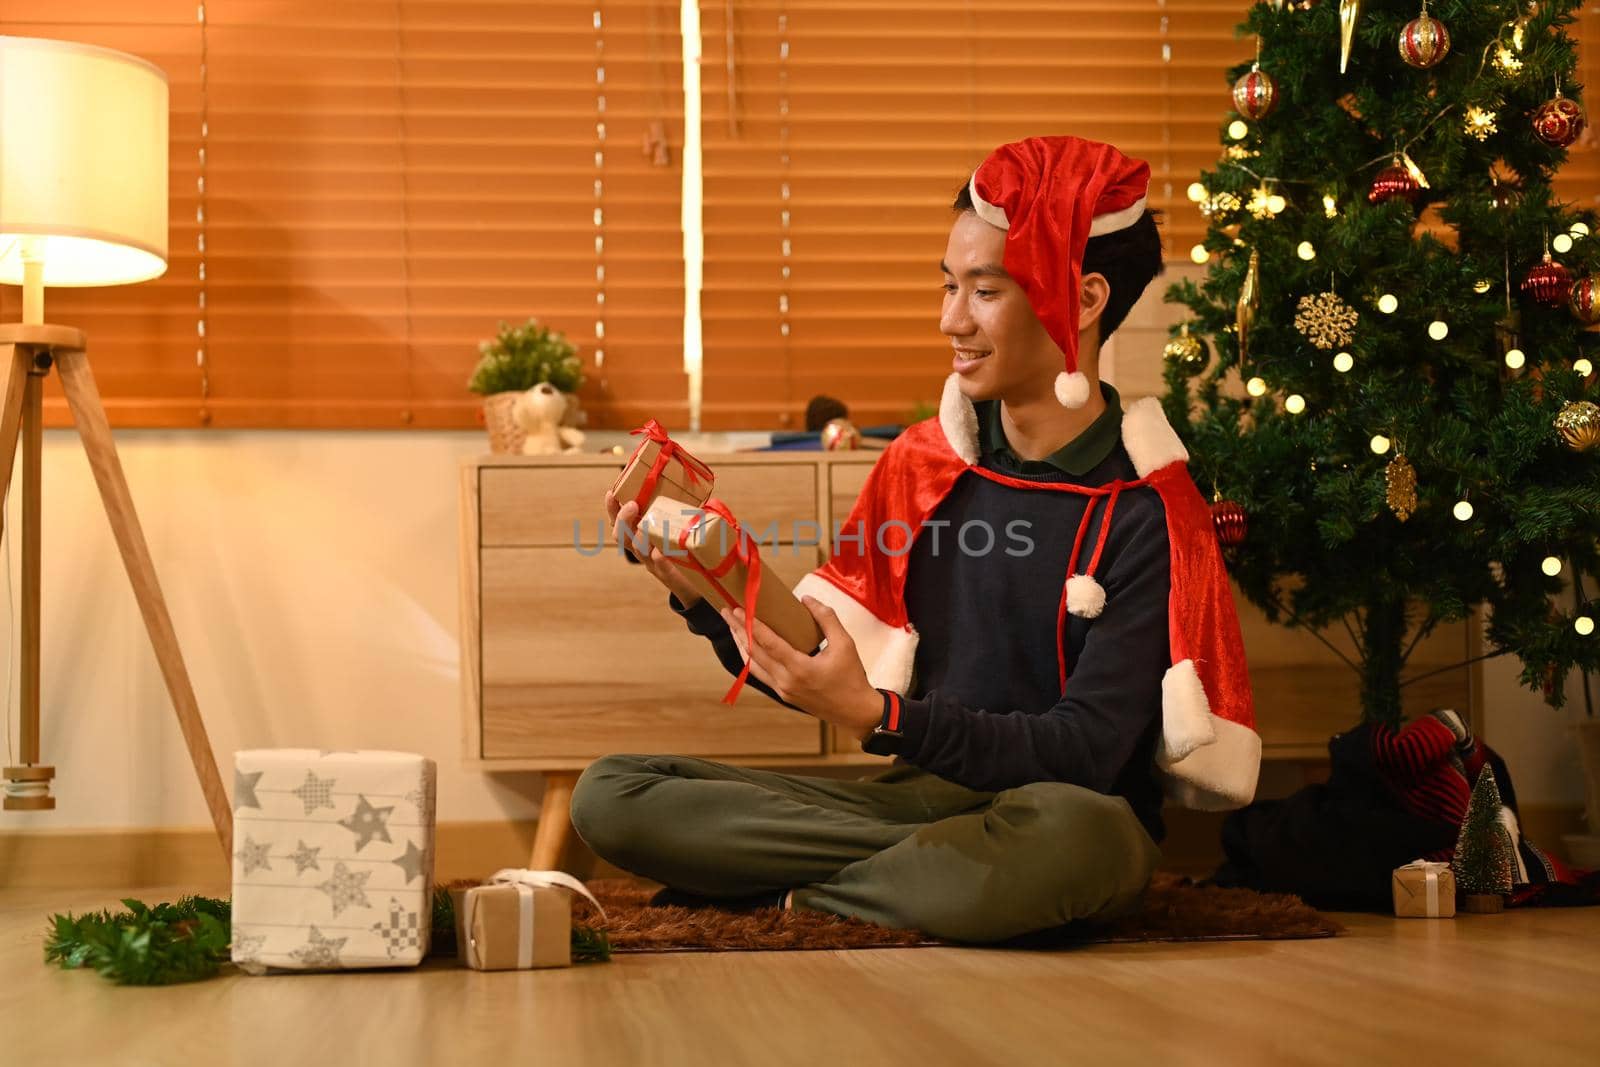 Happy man preparing Christmas presents while sitting near decorated Christmas tree in living room lighted with soft lights.